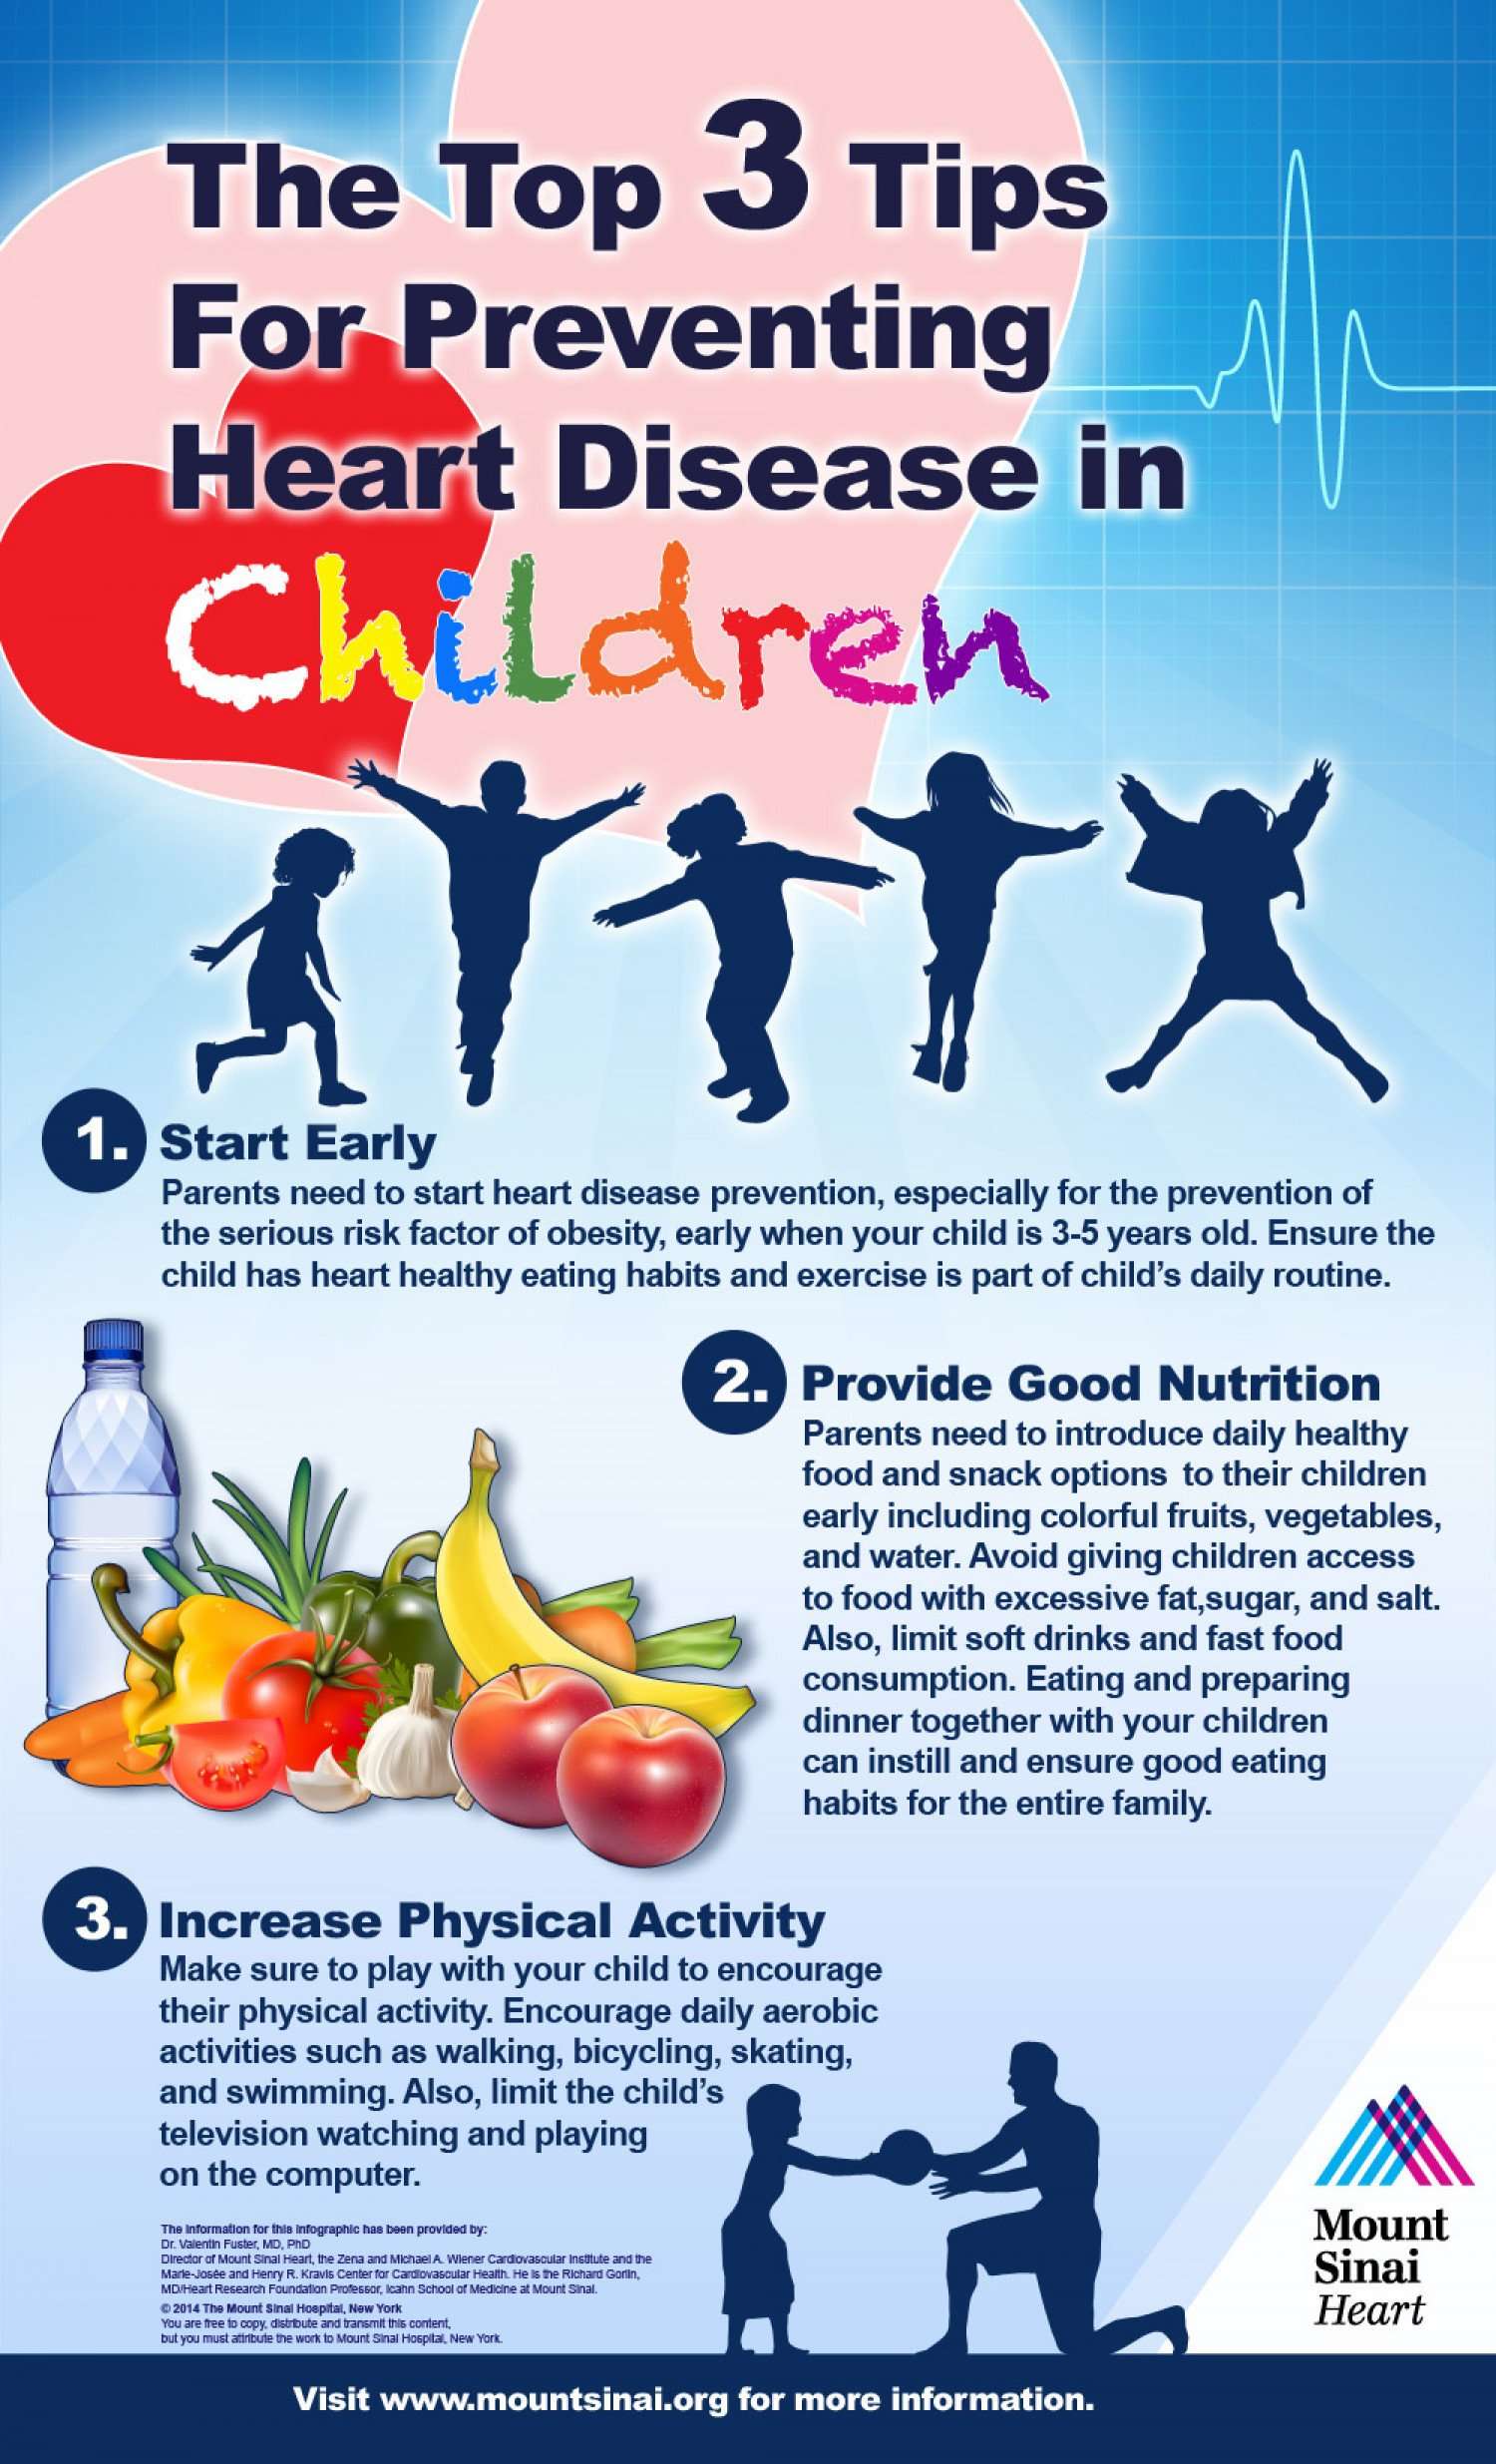 The Top 3 Tips for Preventing Heart Disease in Children ...